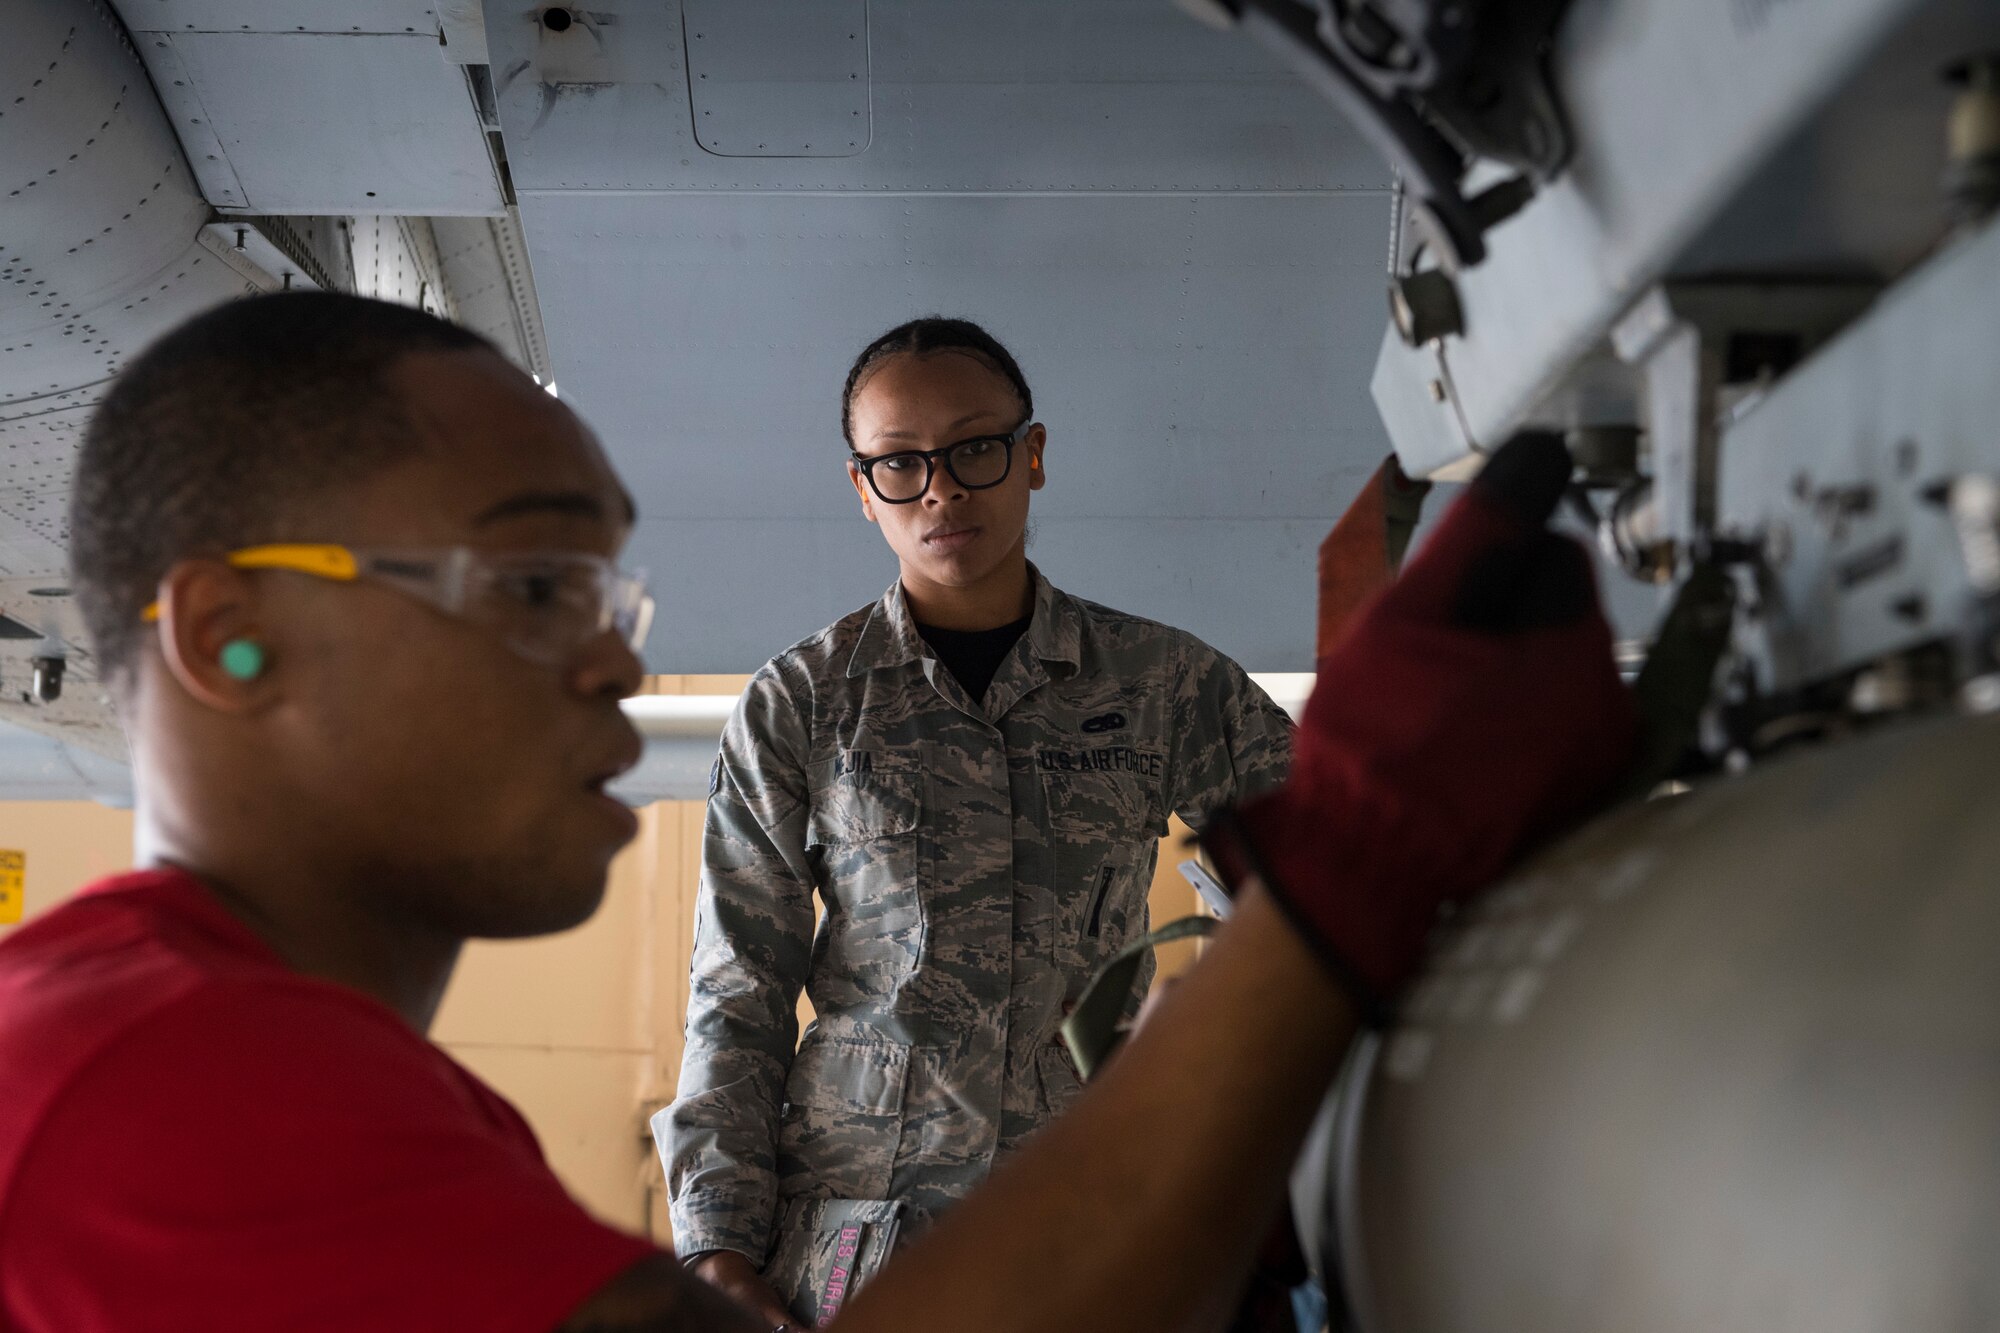 Airman 1st Class Maleek Hurd, 75th Aircraft Maintenance Unit (AMU) weapons load crew member, secures an inert munition during a weapons load competition, April 9, 2018, at Moody Air Force Base, Ga. The 75th and 74th AMUs went head to head with each crew competing to load three munitions onto an A-10 quicker and with less discrepancies than the other. Crews were also judged on dress and appearance and a written test based on munitions knowledge. (U.S. Air Force photo by Senior Airman Janiqua P. Robinson)